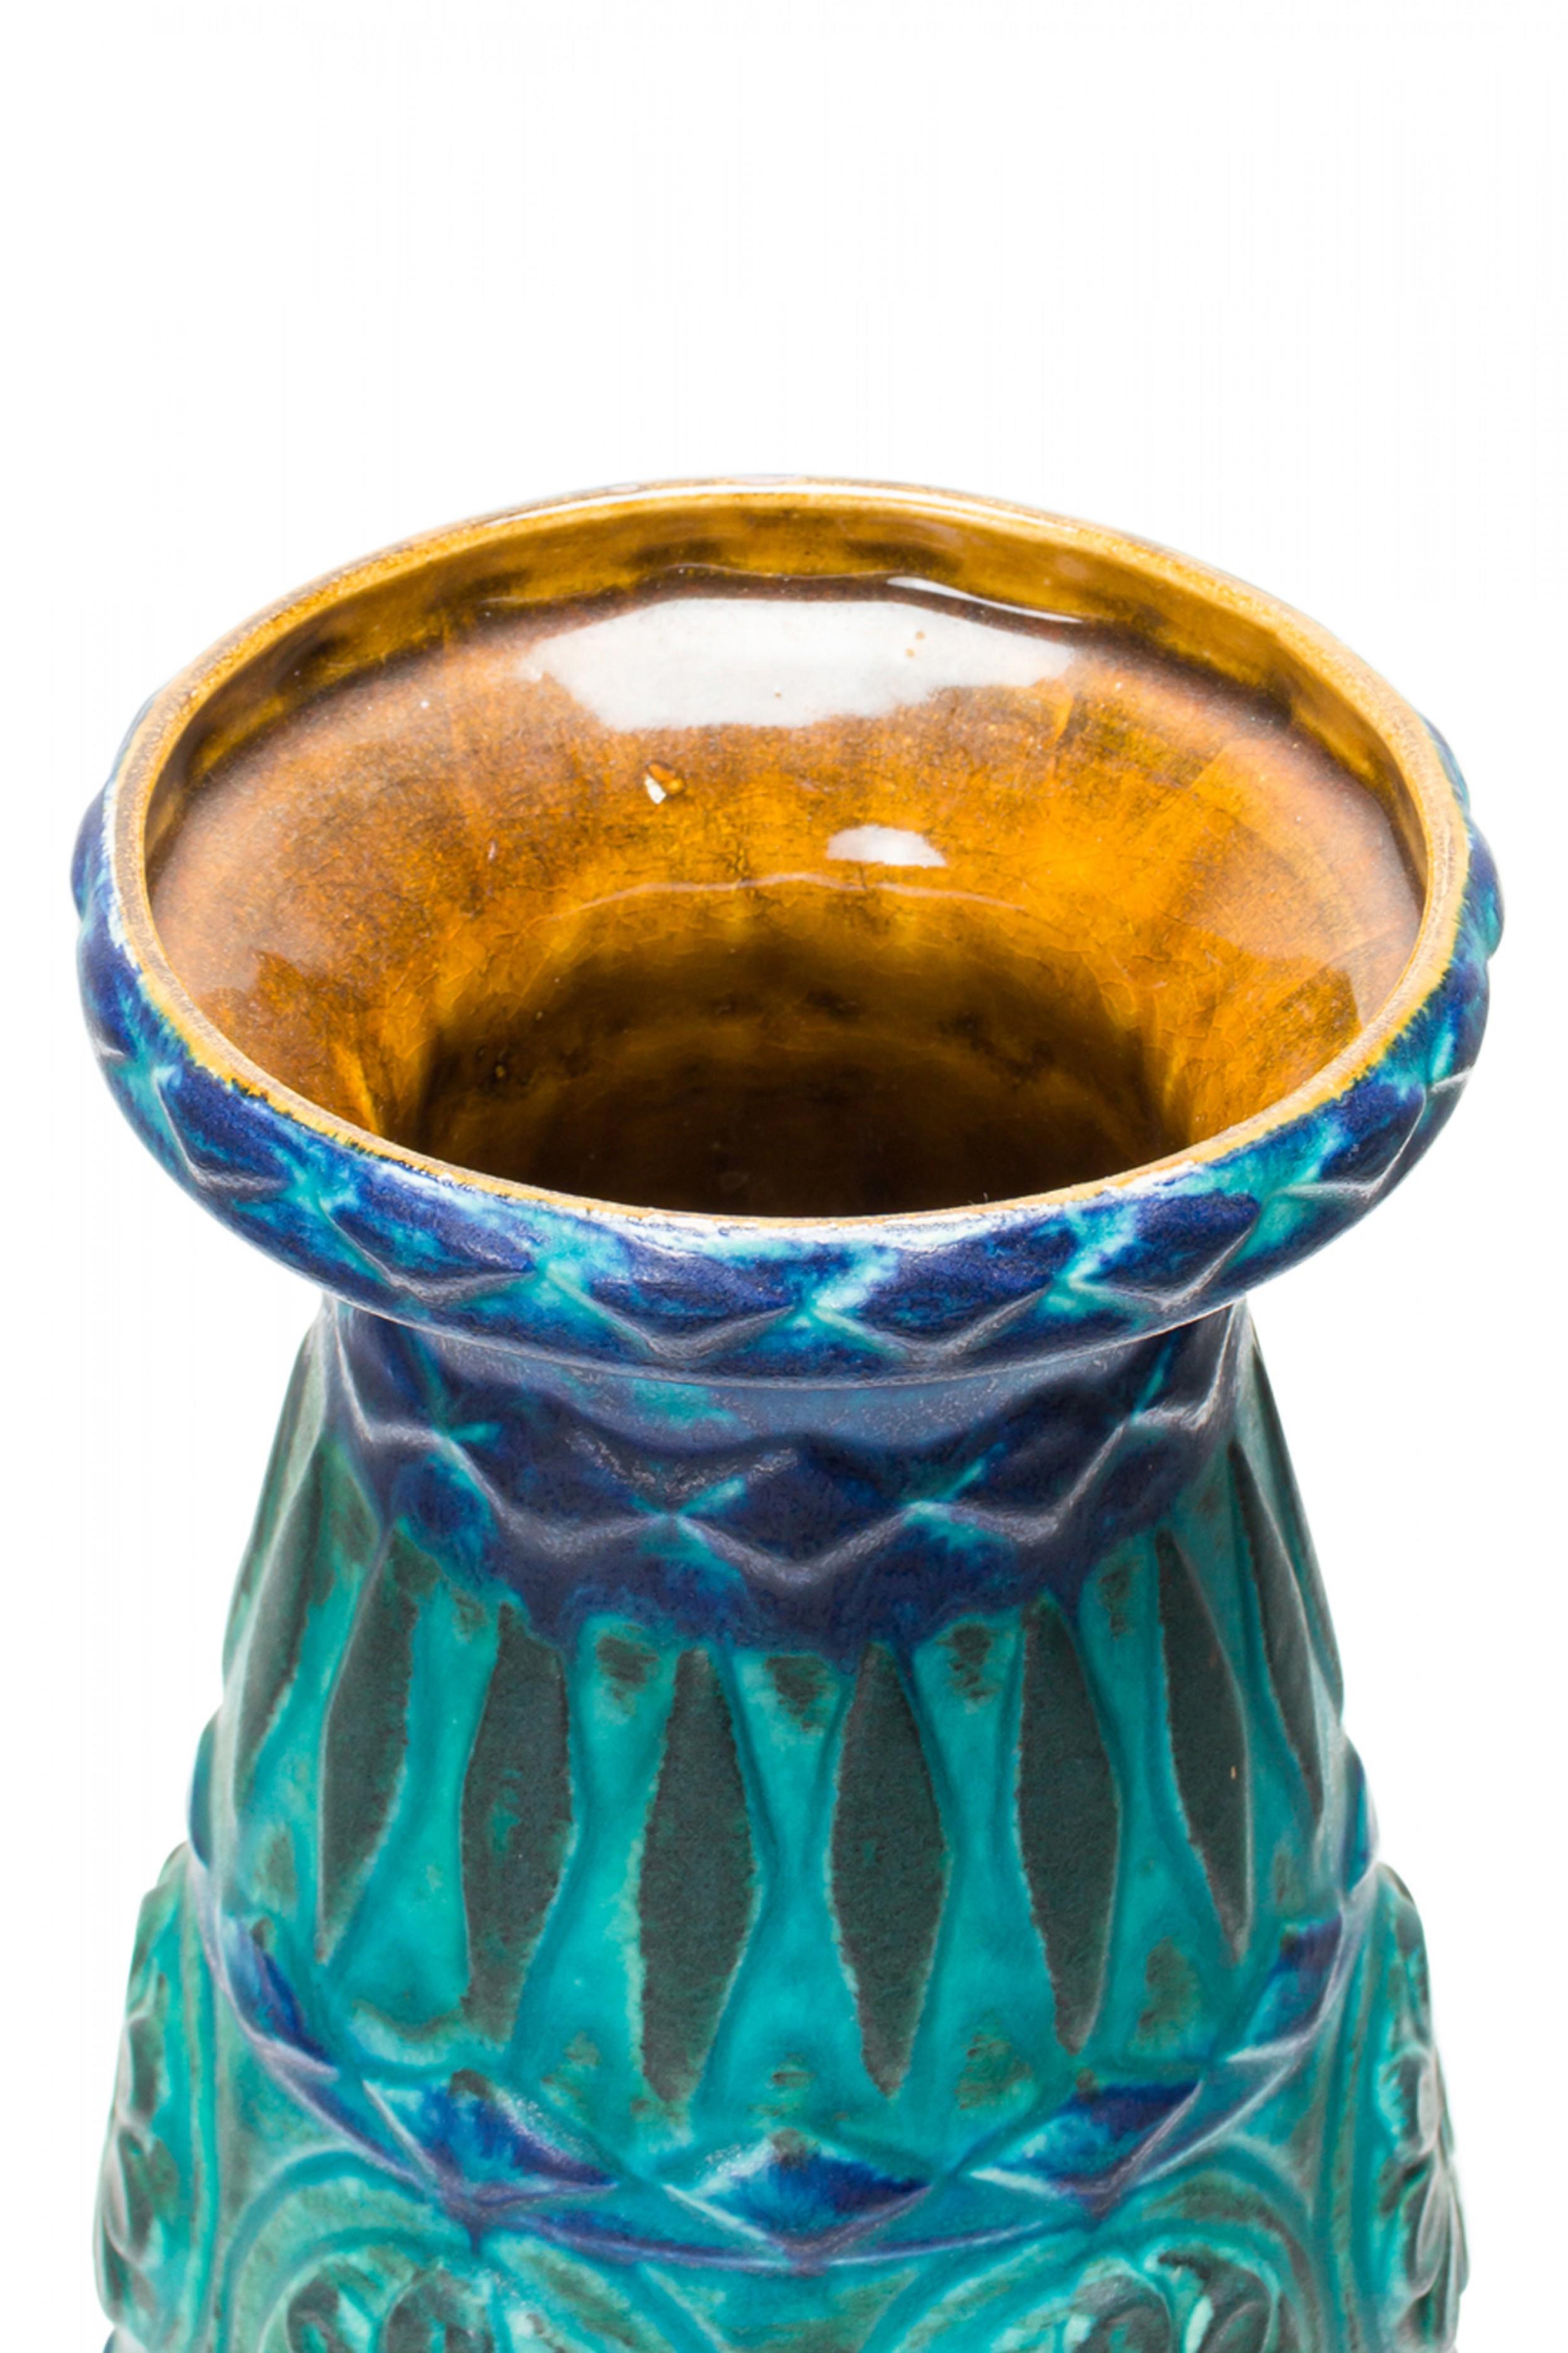 West German mid-century tapered cylindrical form ceramic vase with a wide mouth, a raised banded design of alternating floral medallions and diamonds finished with a multi-tonal green, teal, and blue glaze. (BAY KERAMIK, mark on bottom, BAY W.